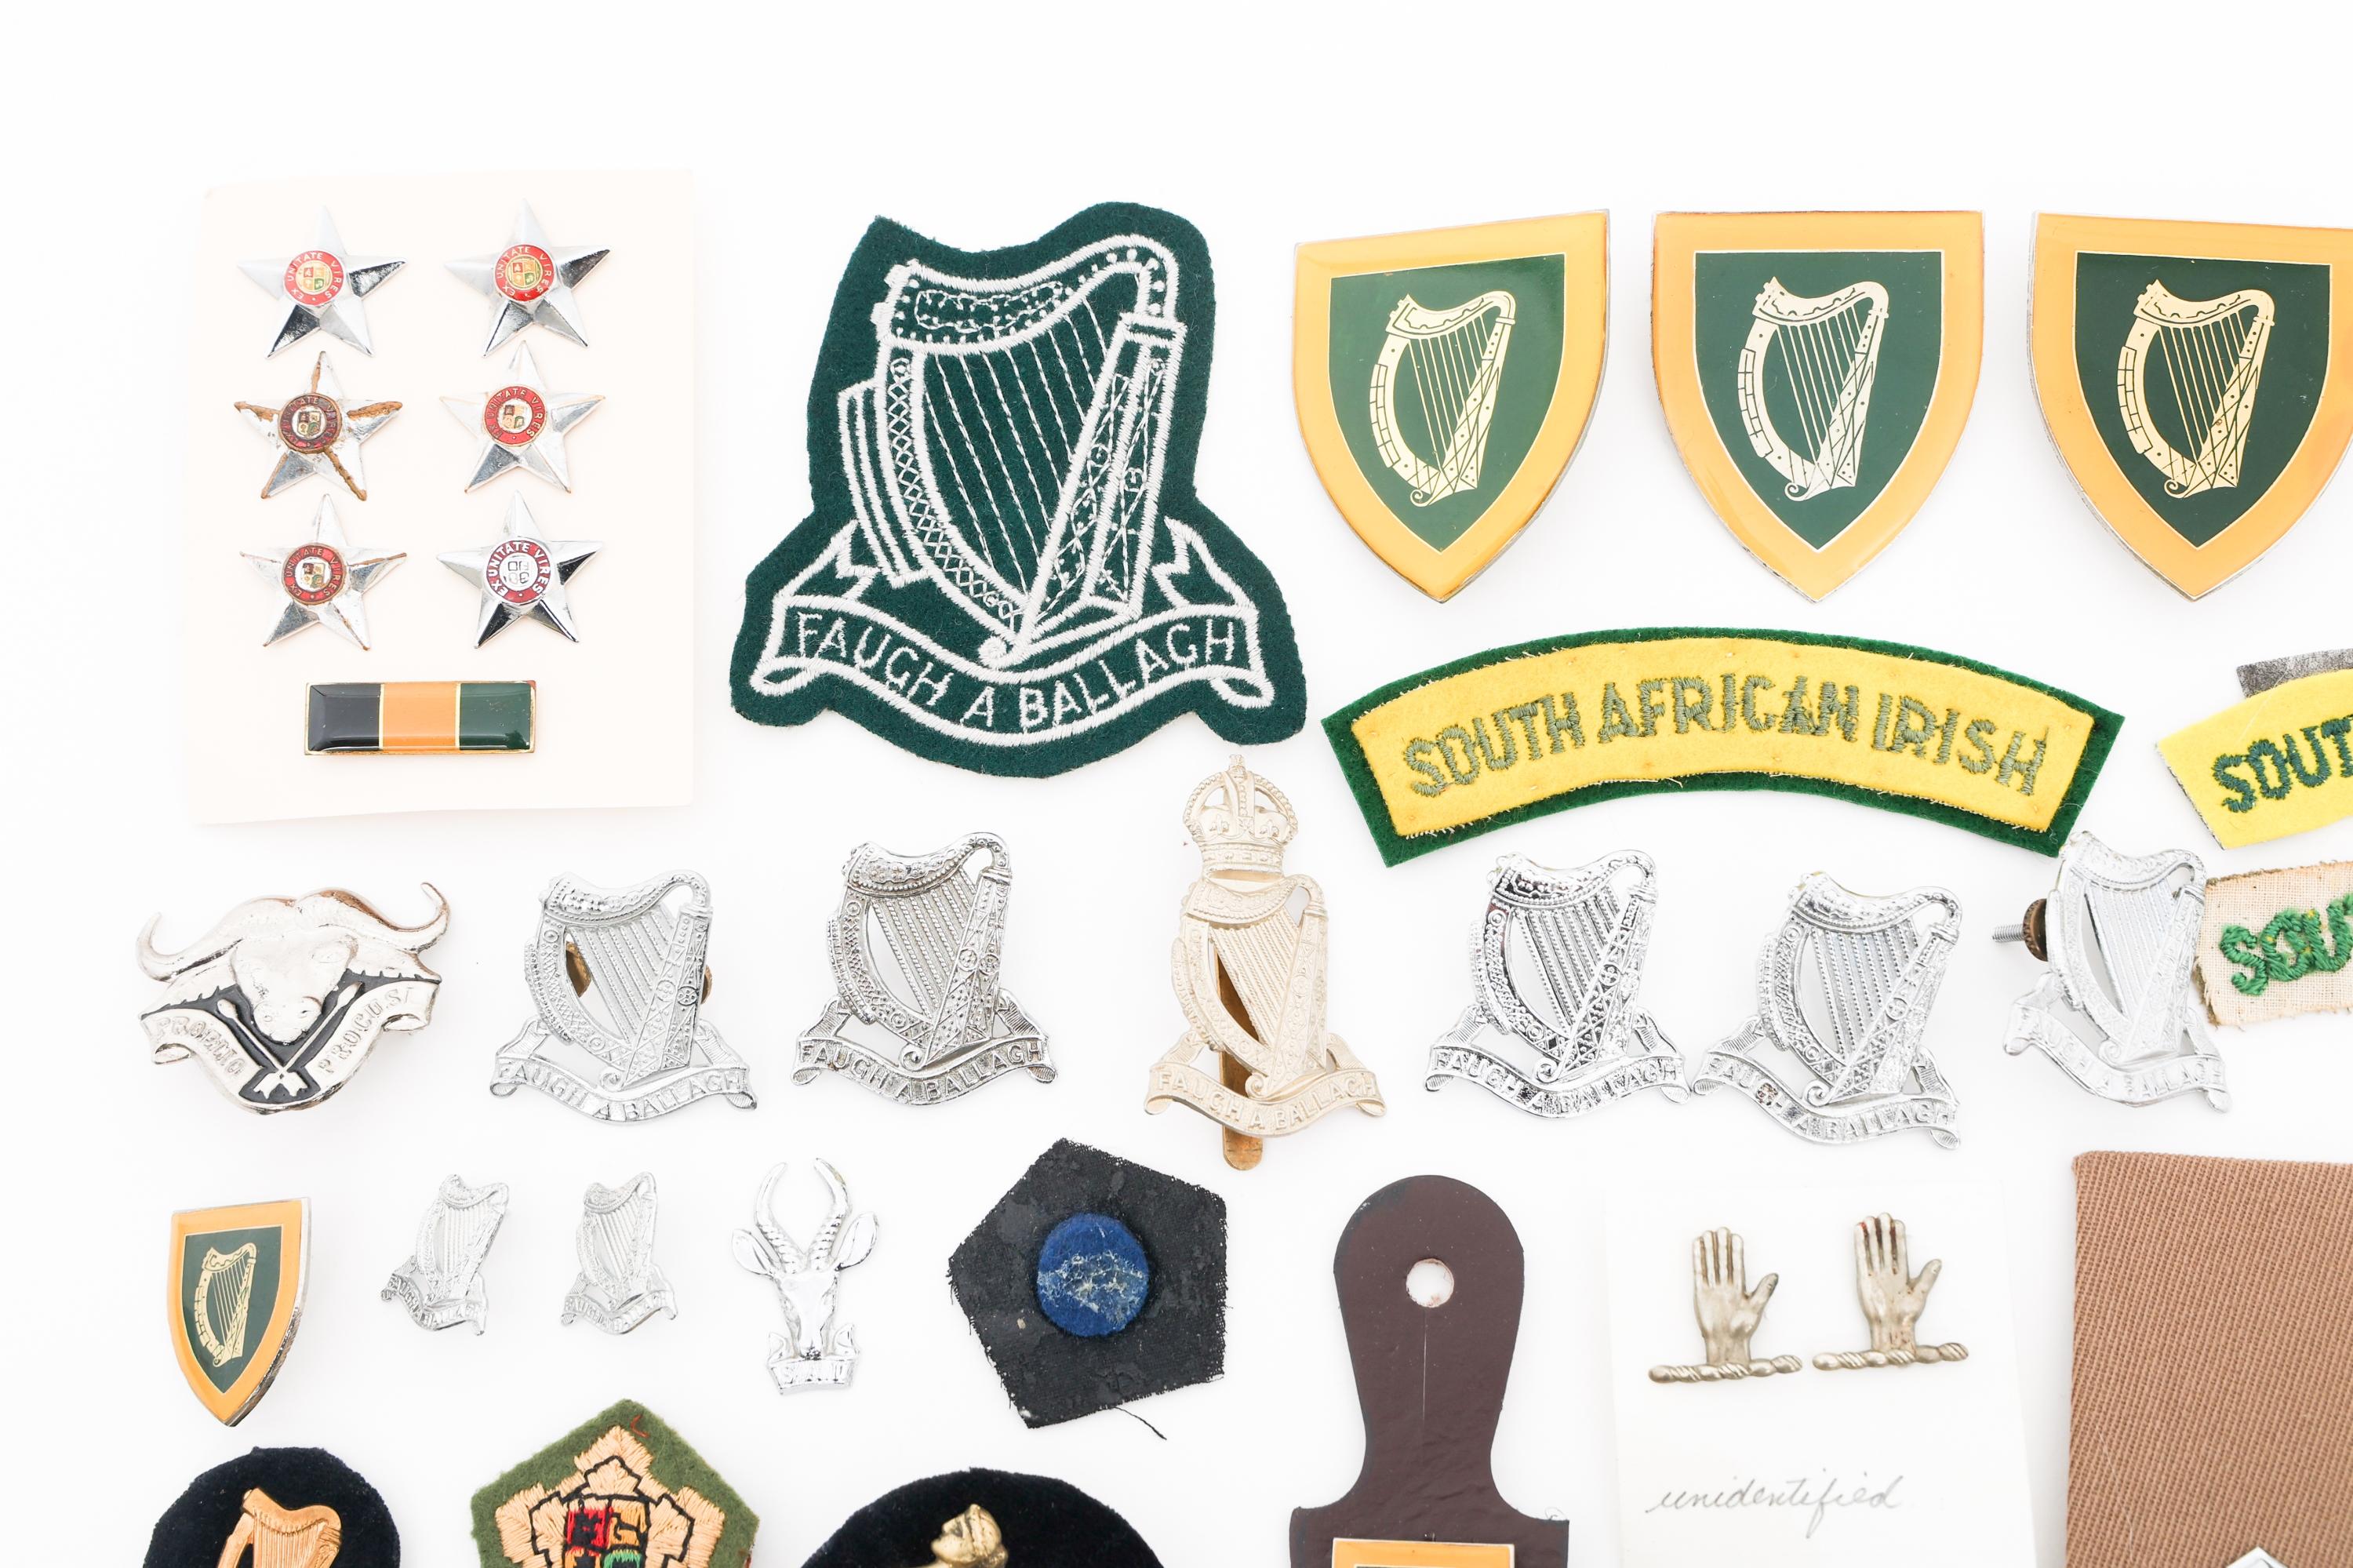 COLD WAR - CURRENT SOUTH AFRICAN IRISH INSIGNIA